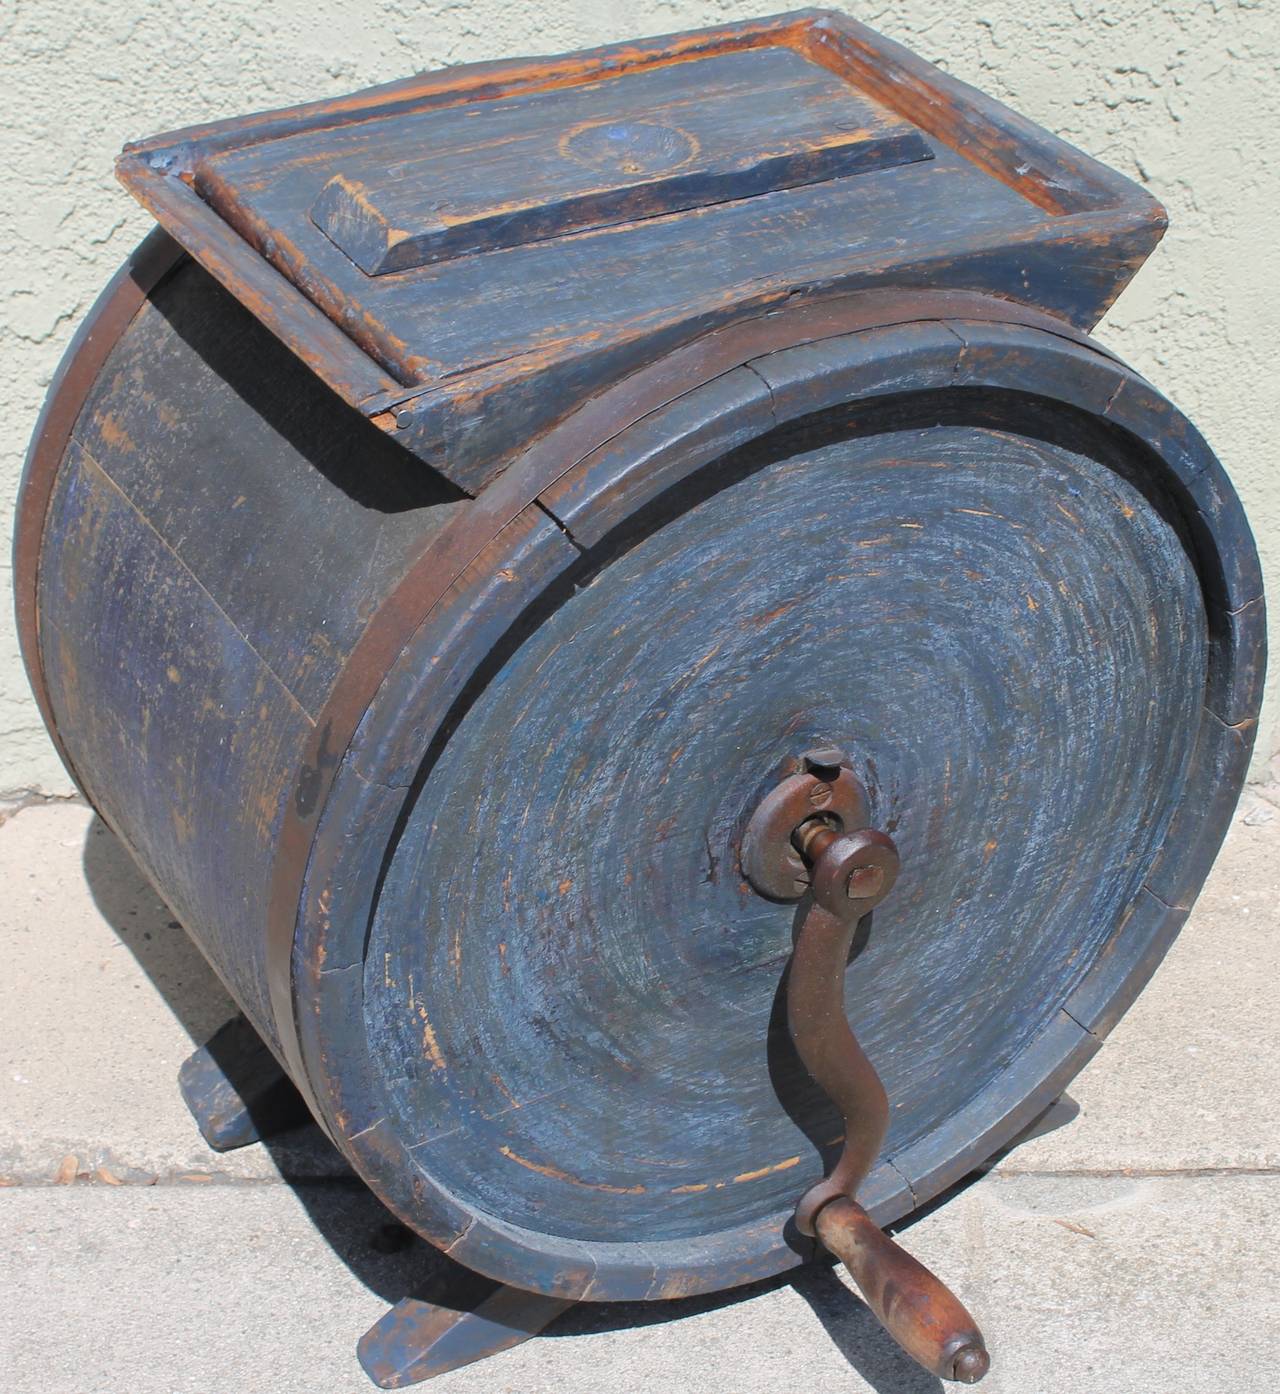 19th century original blue painted butter churn with salmon painted stencil. The cast iron crank and round bands are all original. The condition is very good and in working order. The painted surface is the very best. A wonderful worn patina.